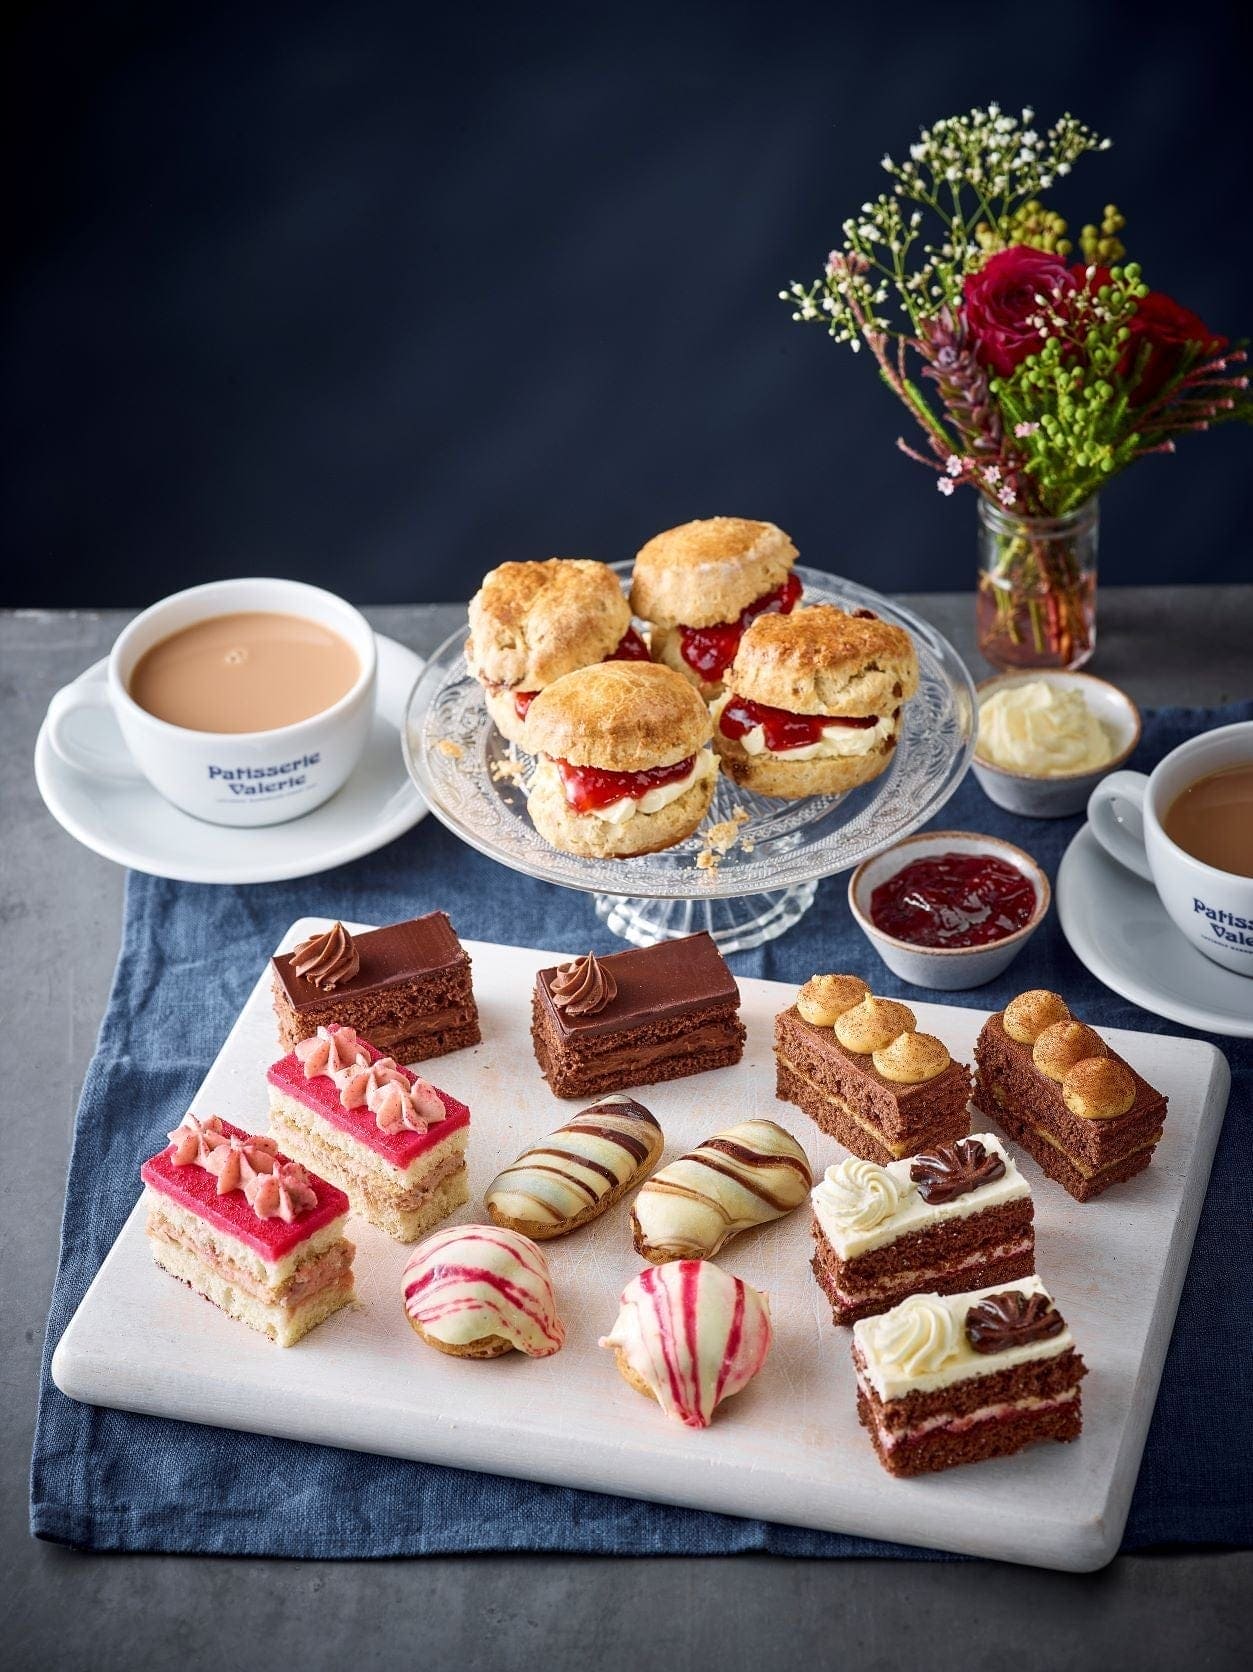 Madame Valerie's Afternoon Tea for Two with Cake Stand - Patisserie Valerie